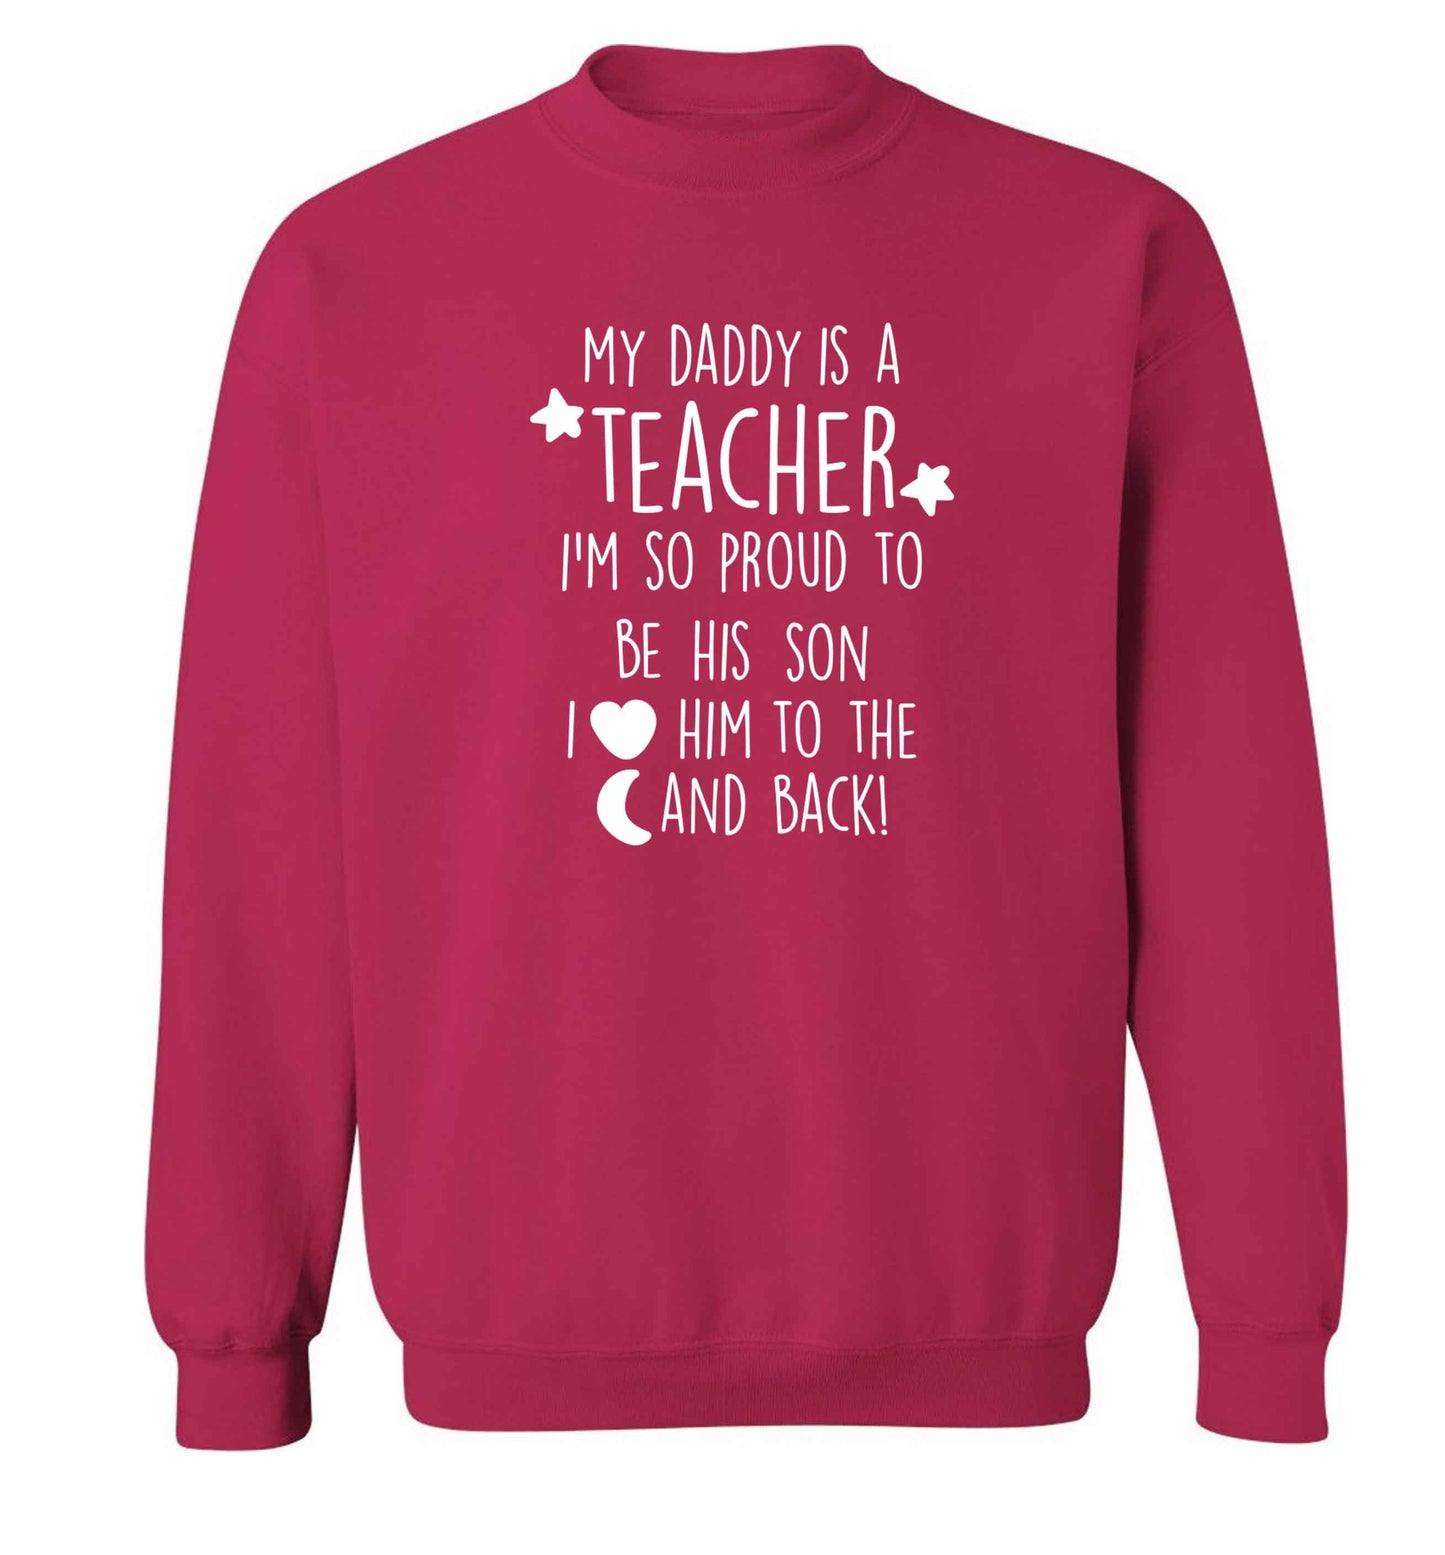 My daddy is a teacher I'm so proud to be his son I love her to the moon and back adult's unisex pink sweater 2XL